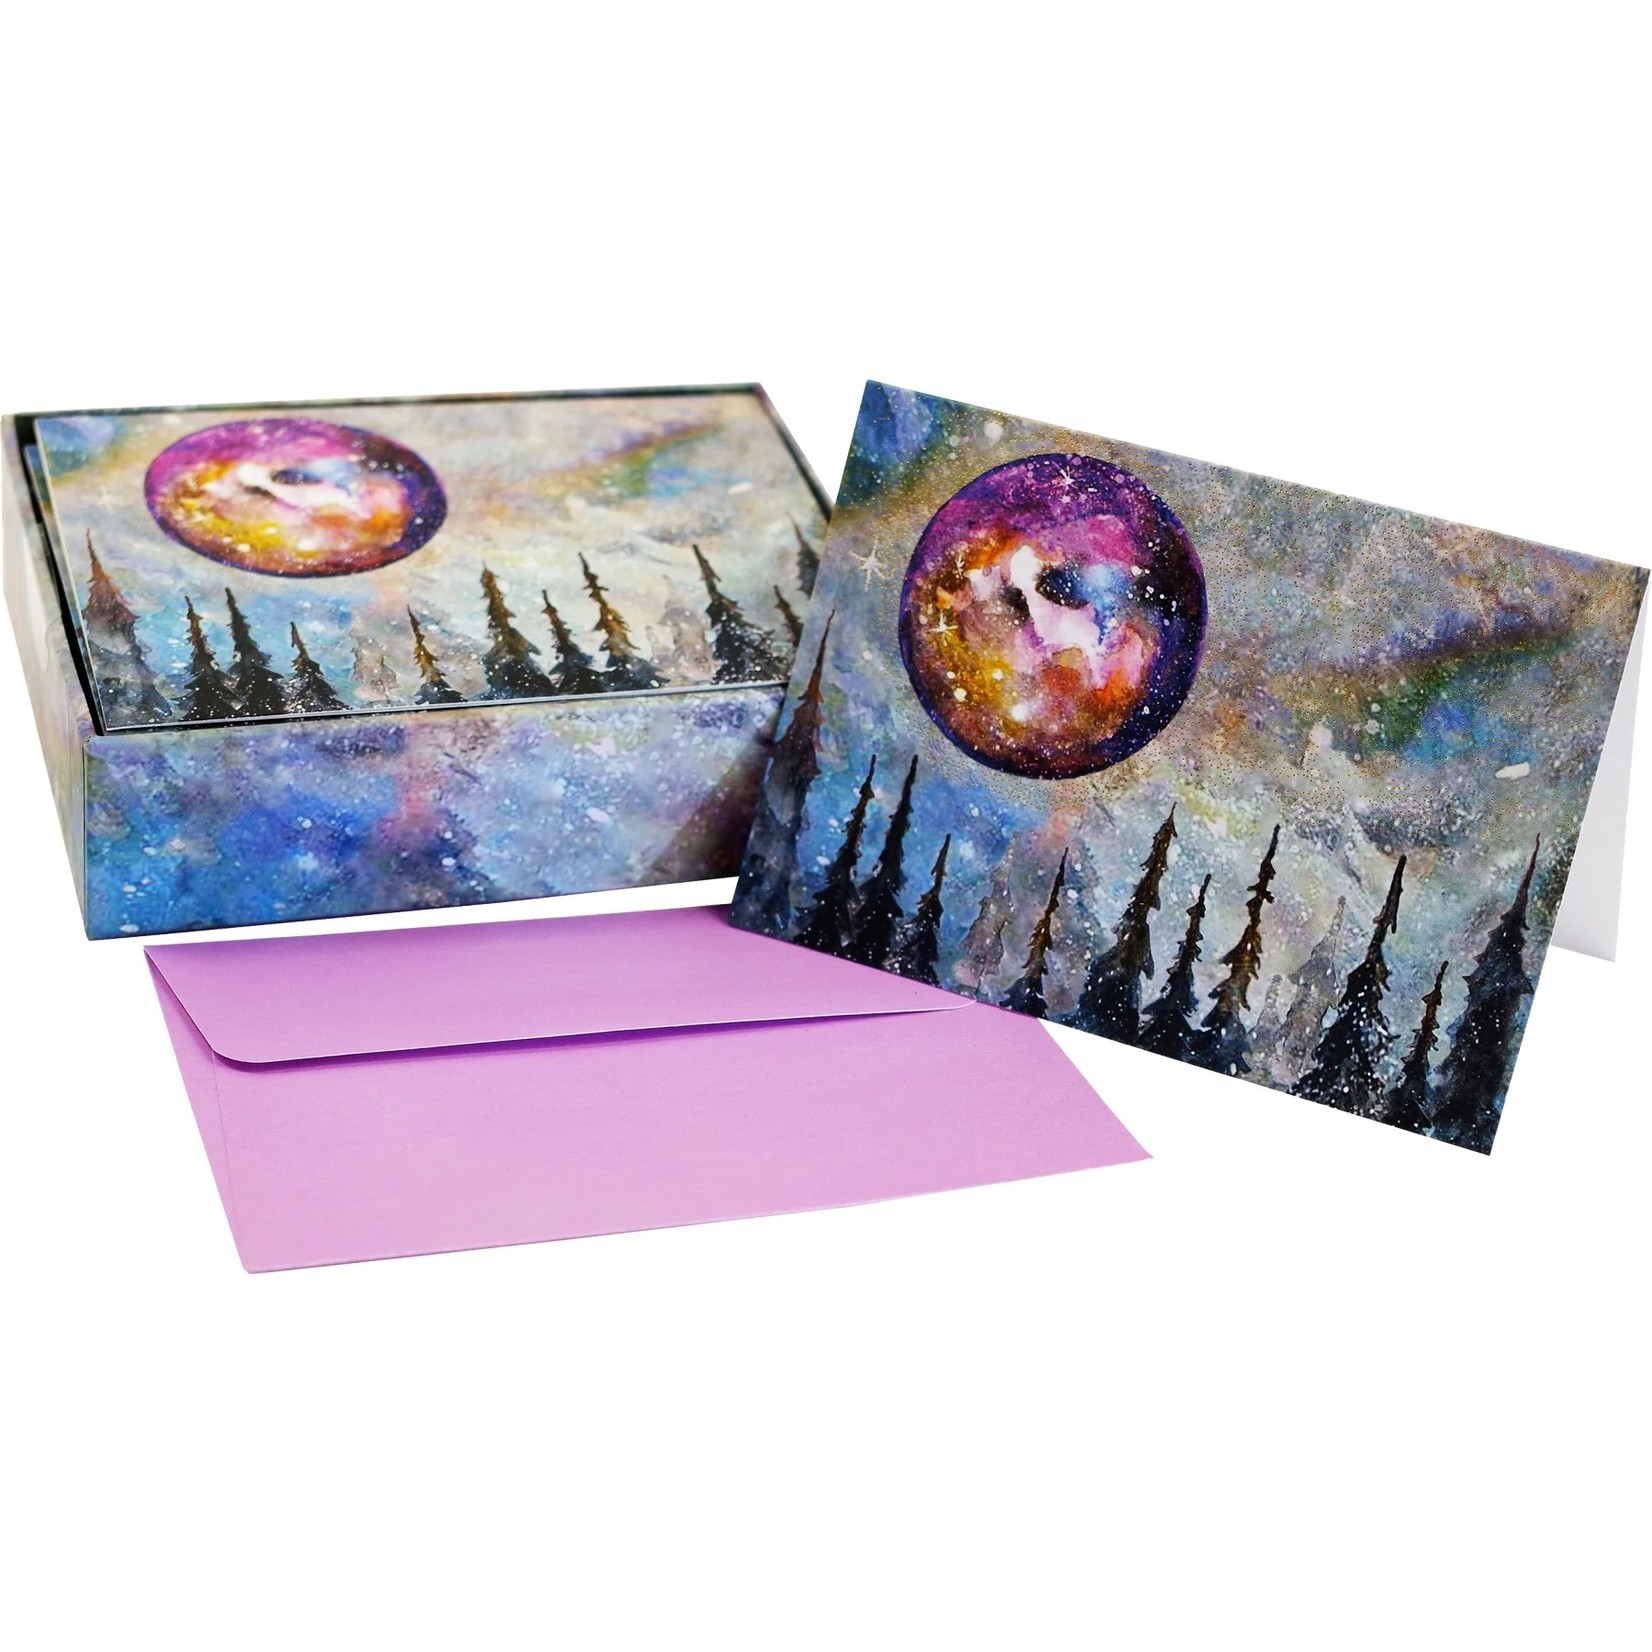 Peter Pauper Press Boxed Note Cards: Mystic Moon